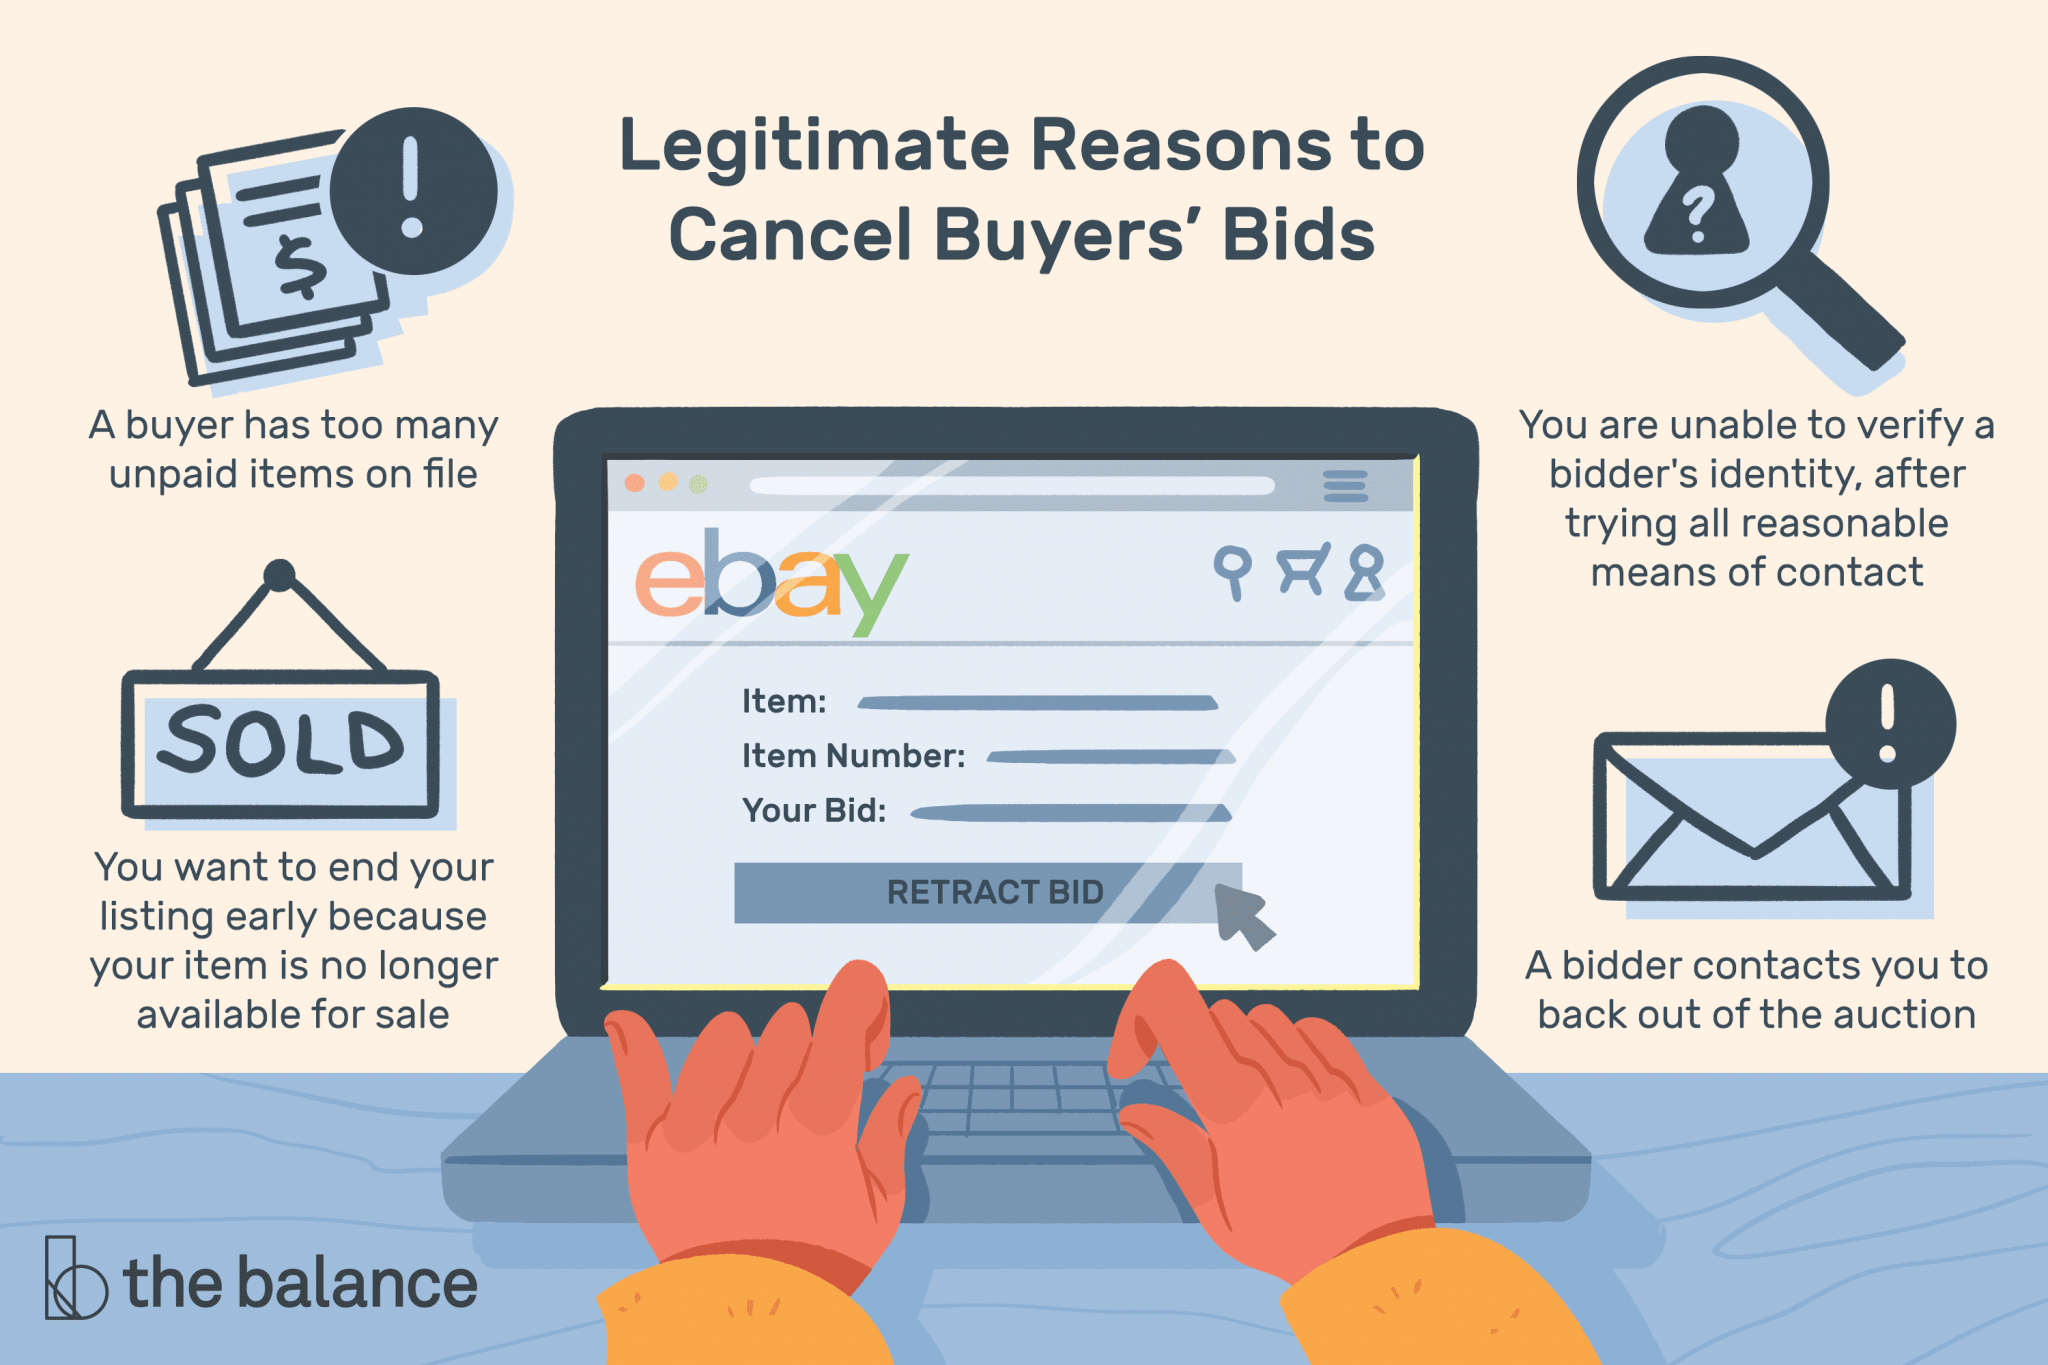 How To Cancel An Offer On Ebay